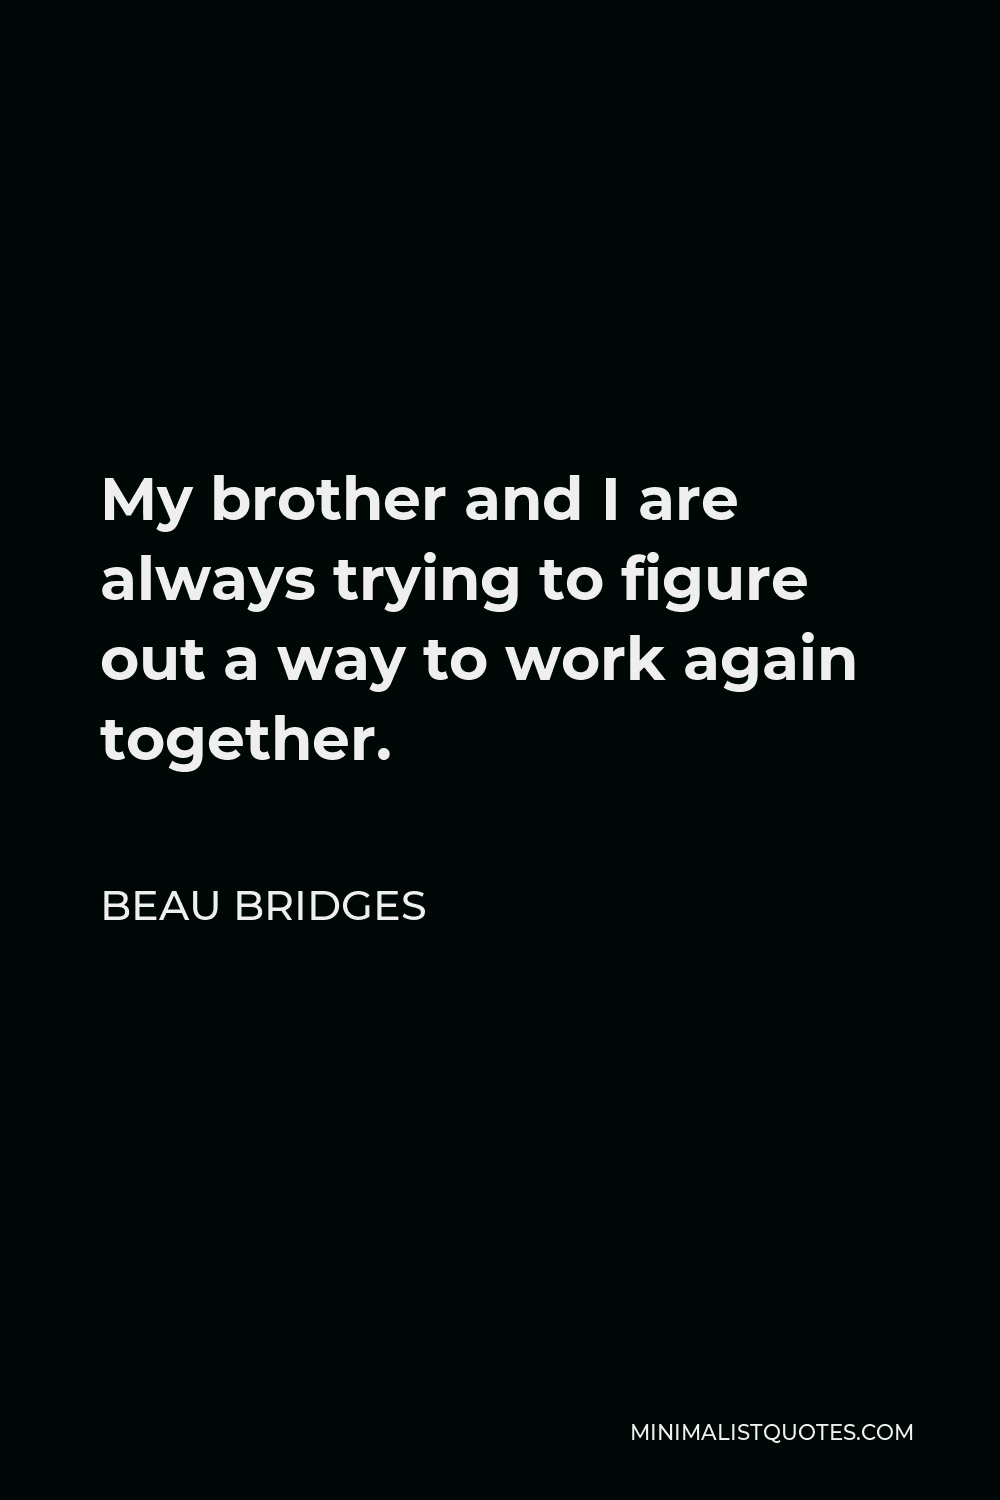 Beau Bridges Quote - My brother and I are always trying to figure out a way to work again together.